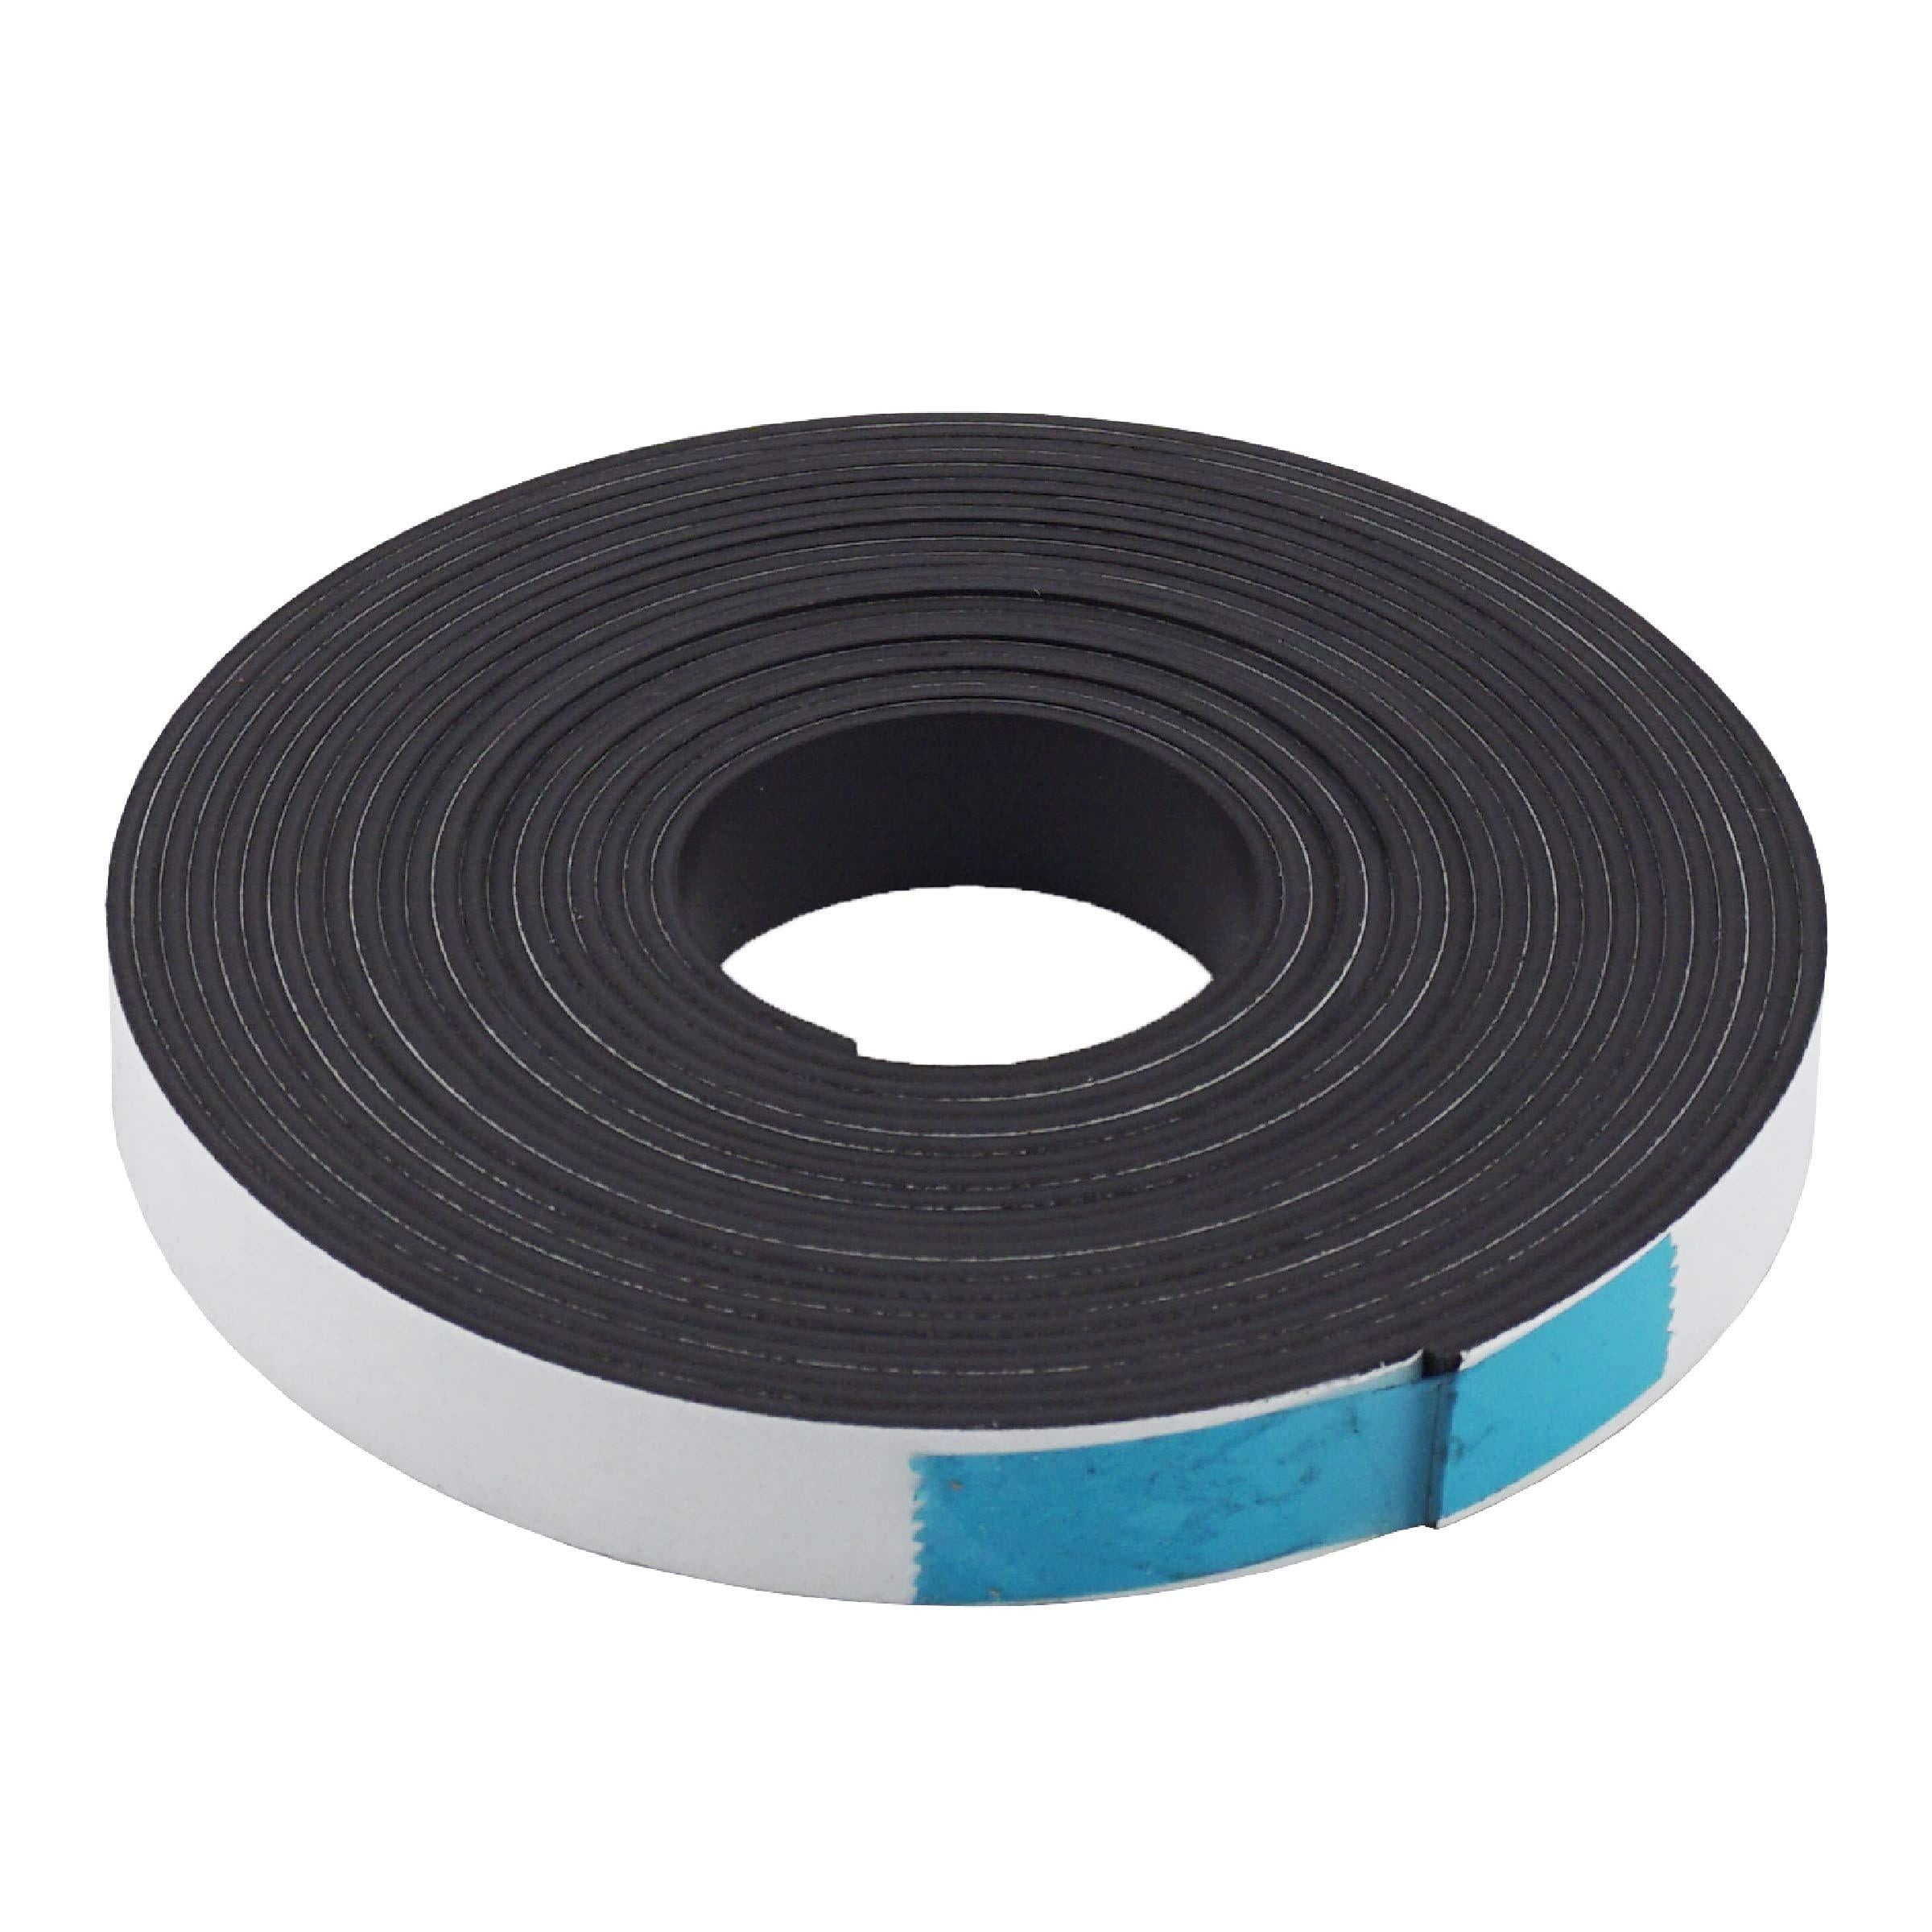 Flexible Magnetic Tape Roll with Adhesive Backing- Super Sticky! Superior Quality! by Flexible Magnets- 60mil x 0.5 in x 5ft